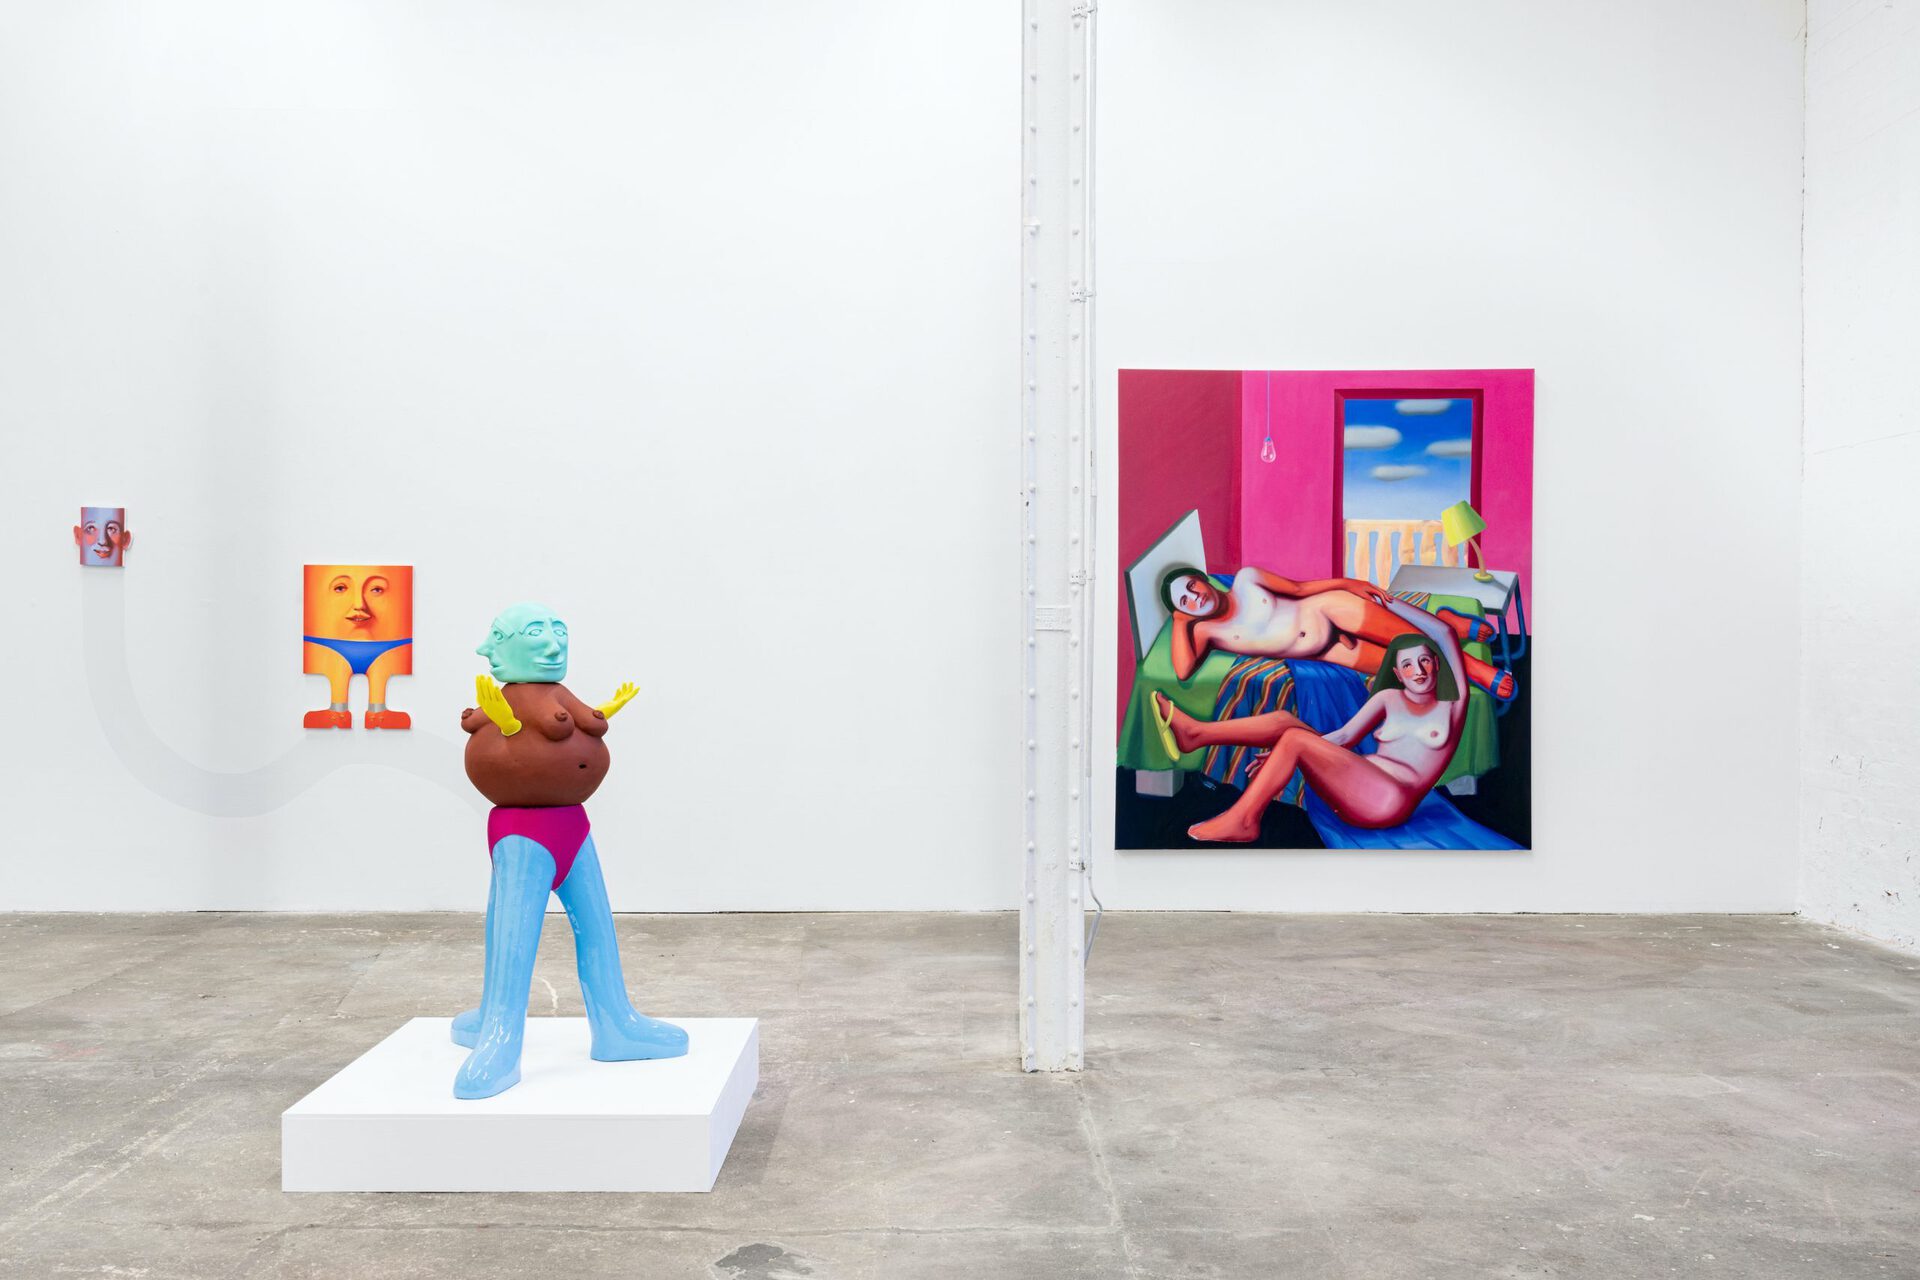 Installation view with sculpture “Triple Topless Virgin” from the Series of Instable Columns